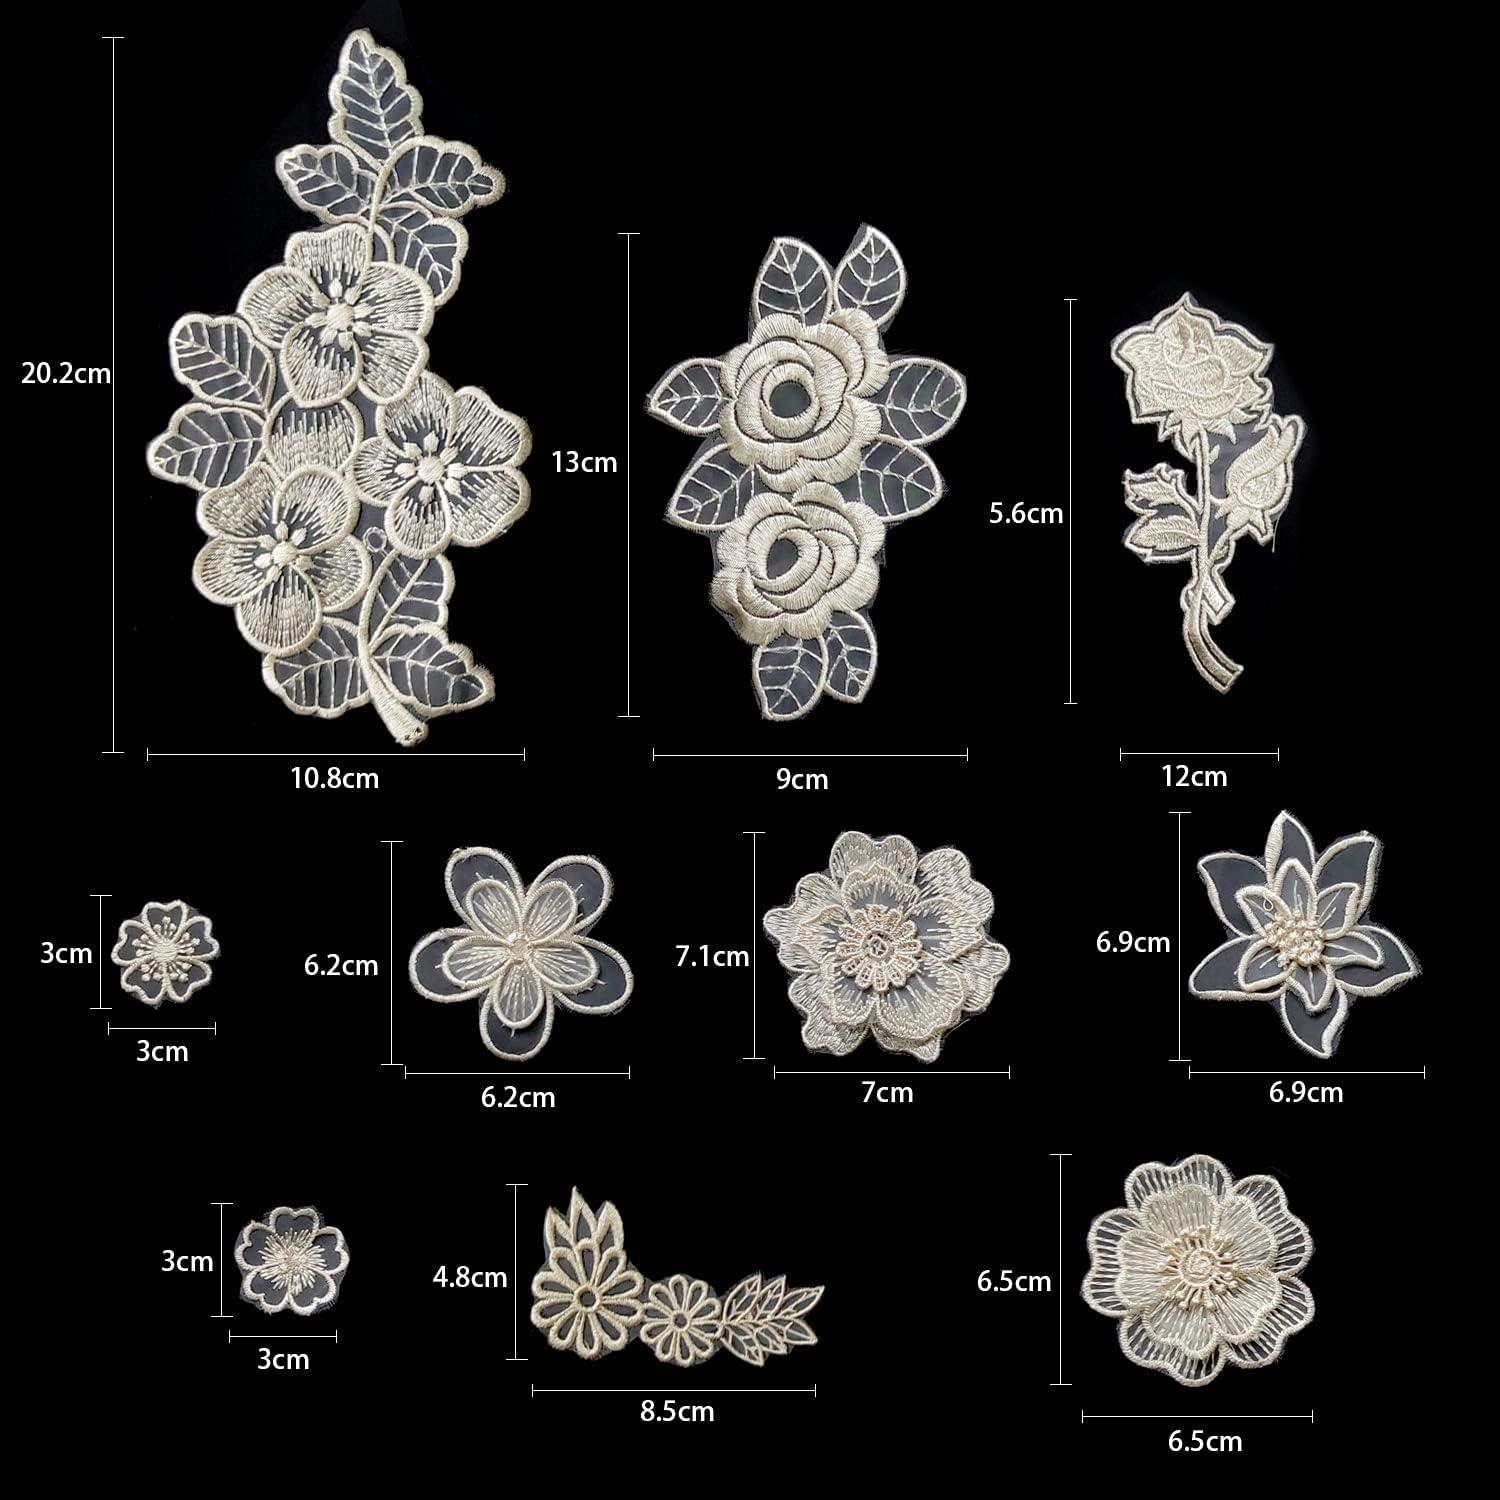 Qililandiy 10 Pcs Beige Mixed Style Embroidery Lace Flower Patches  Appliques DIY Sewing Craft for Decoration, Sew On Patches for Repairing and  Decorating